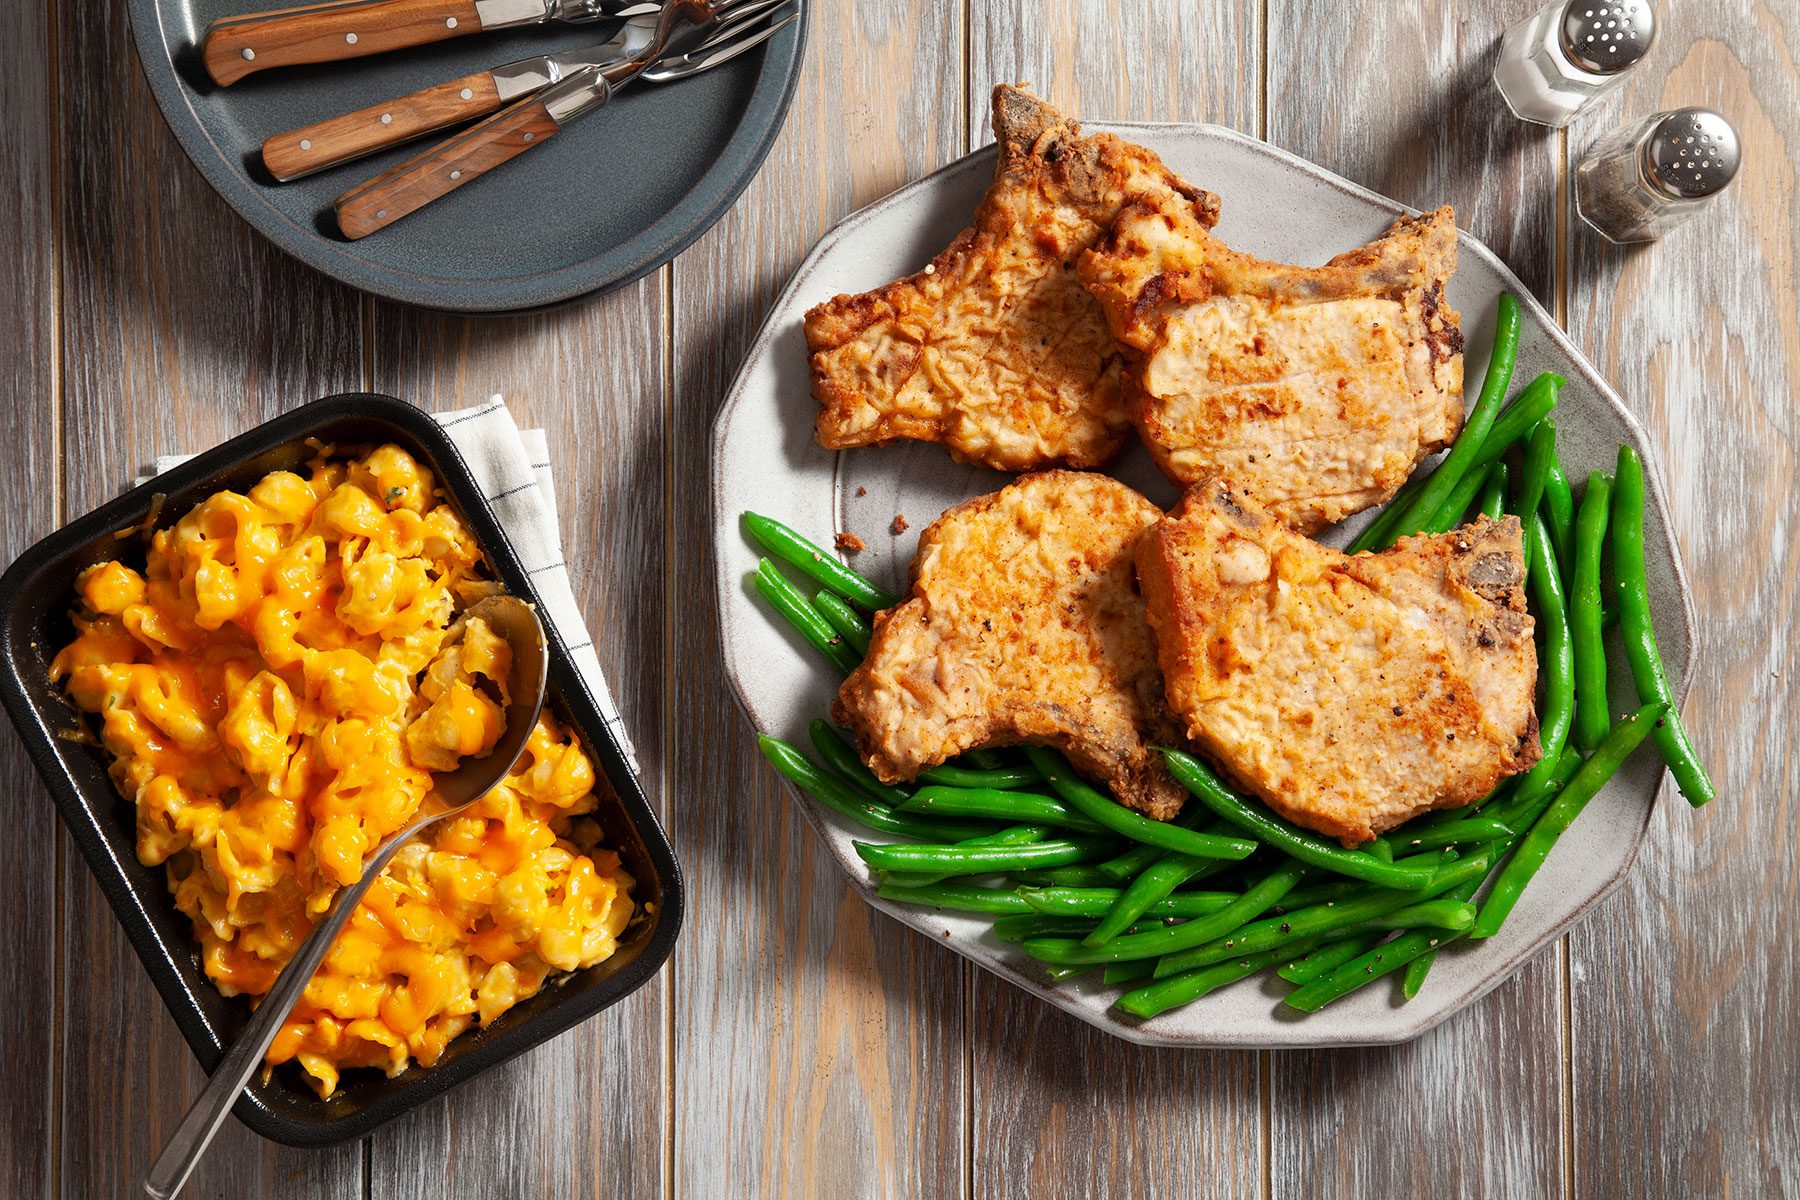 Southern Fried Pork Chops Recipe: How to Make It